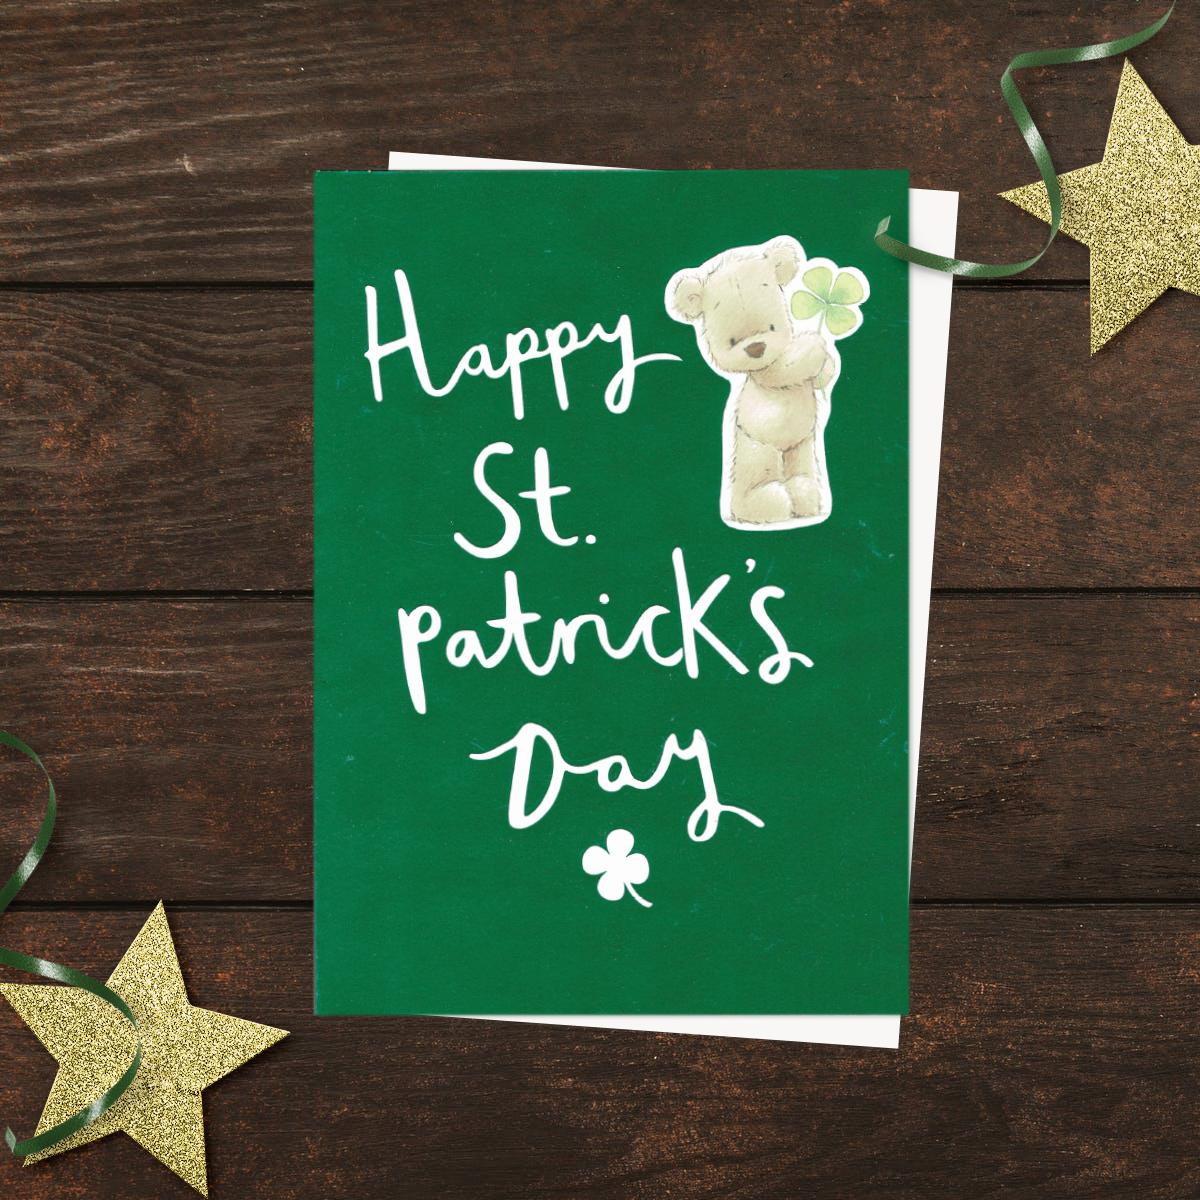 ' Happy St. Patrick's Day' Card Showing Cute Bear Holding Clover. With White Envelope